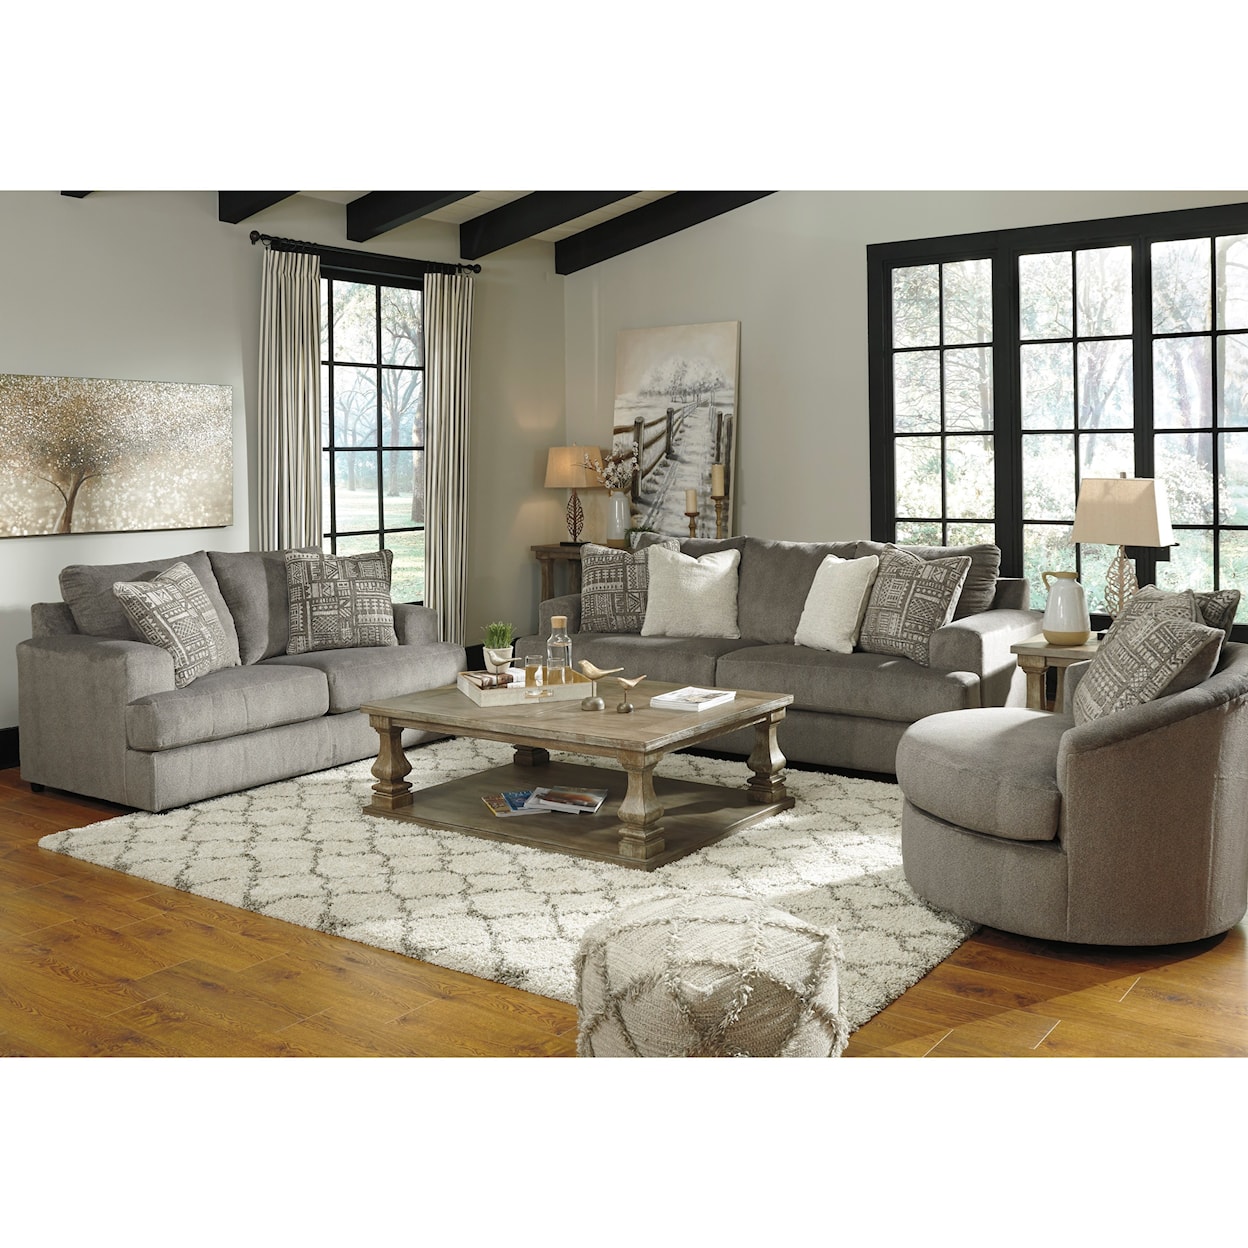 Signature Design by Ashley Furniture Soletren Stationary Living Room Group